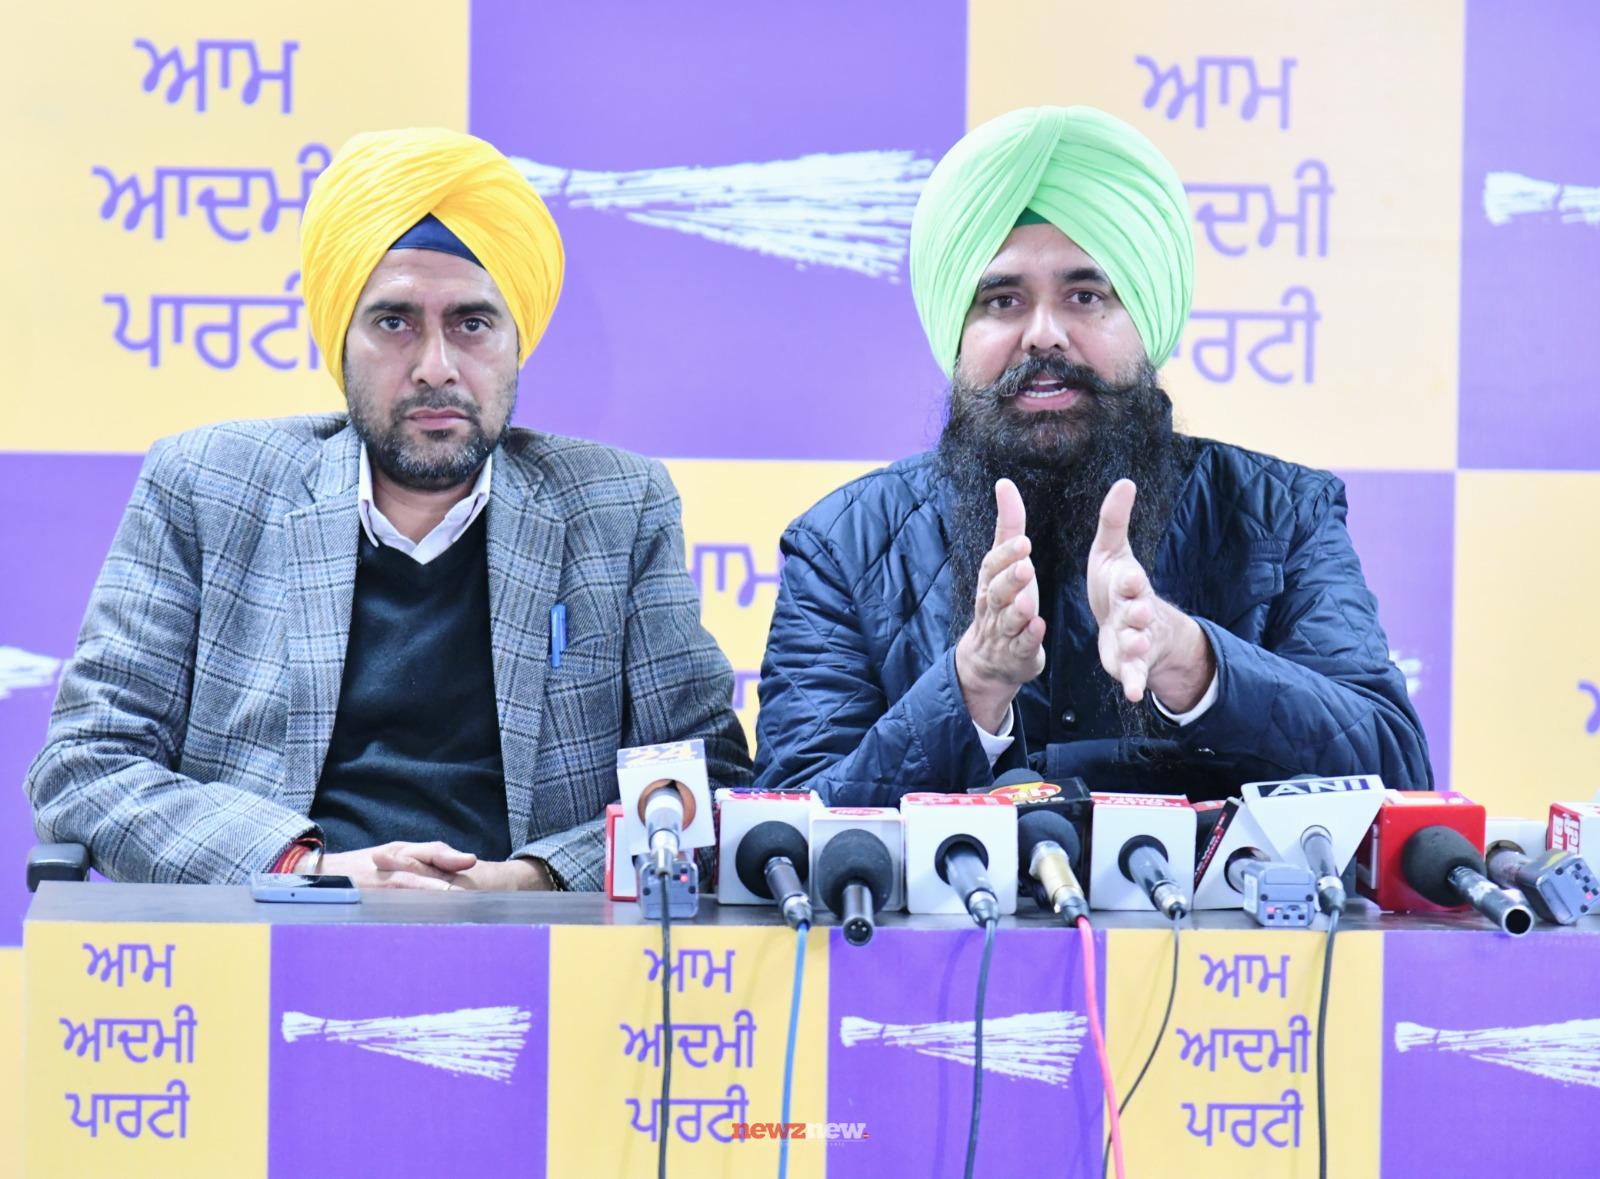 AAP government is the government of every section of Punjab said Malvinder Singh Kang